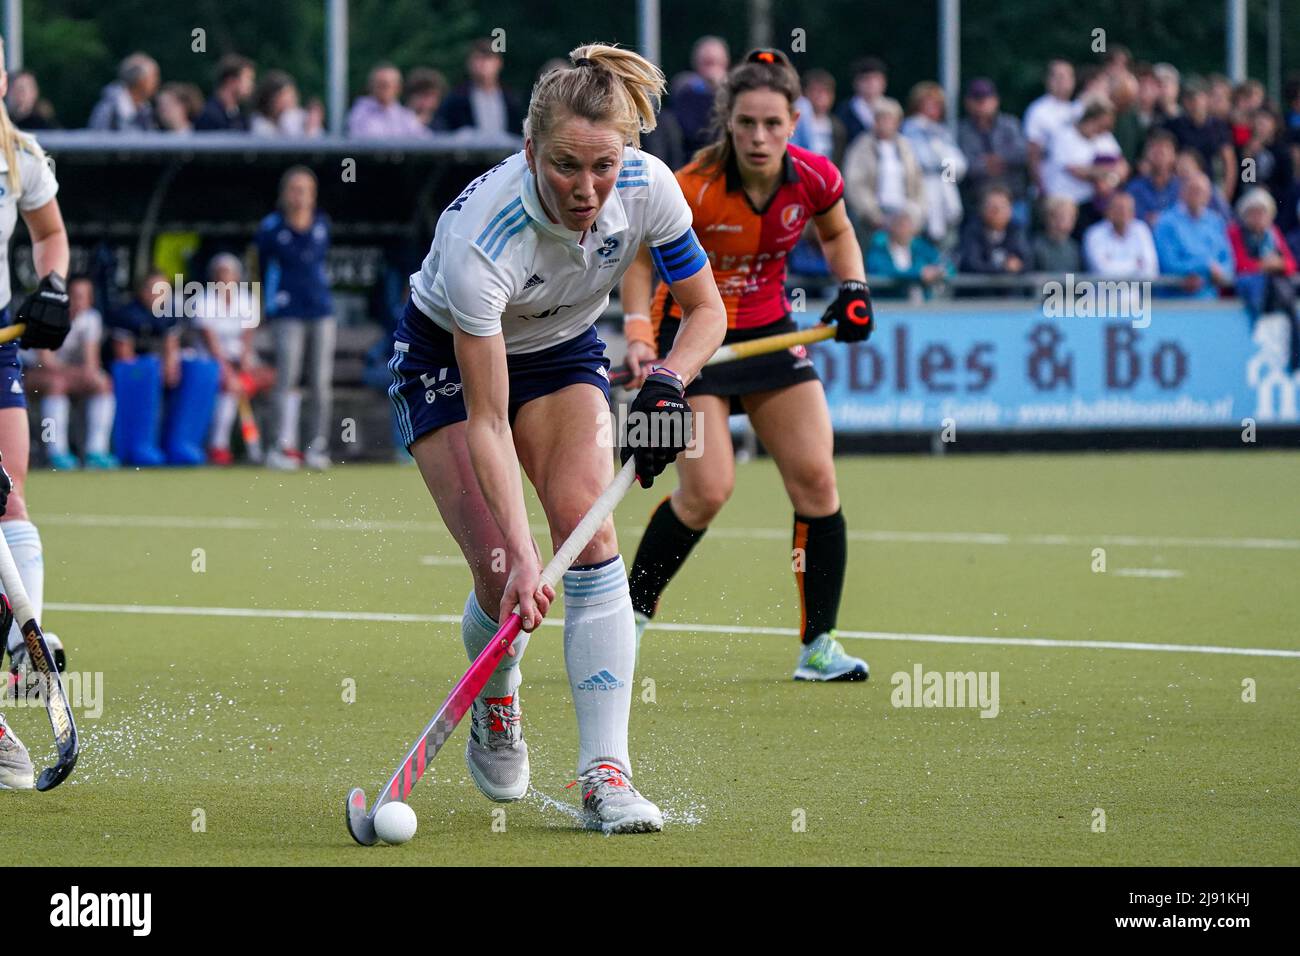 TILBURG, NETHERLANDS - MAY 19: Ireen van den Assem of Tilburg D1 during the  Play-Outs 2022 Hockey Dames match between Tilburg D1 and Oranje-Rood D1 at  Hockeyclub Tilburg on May 19, 2022